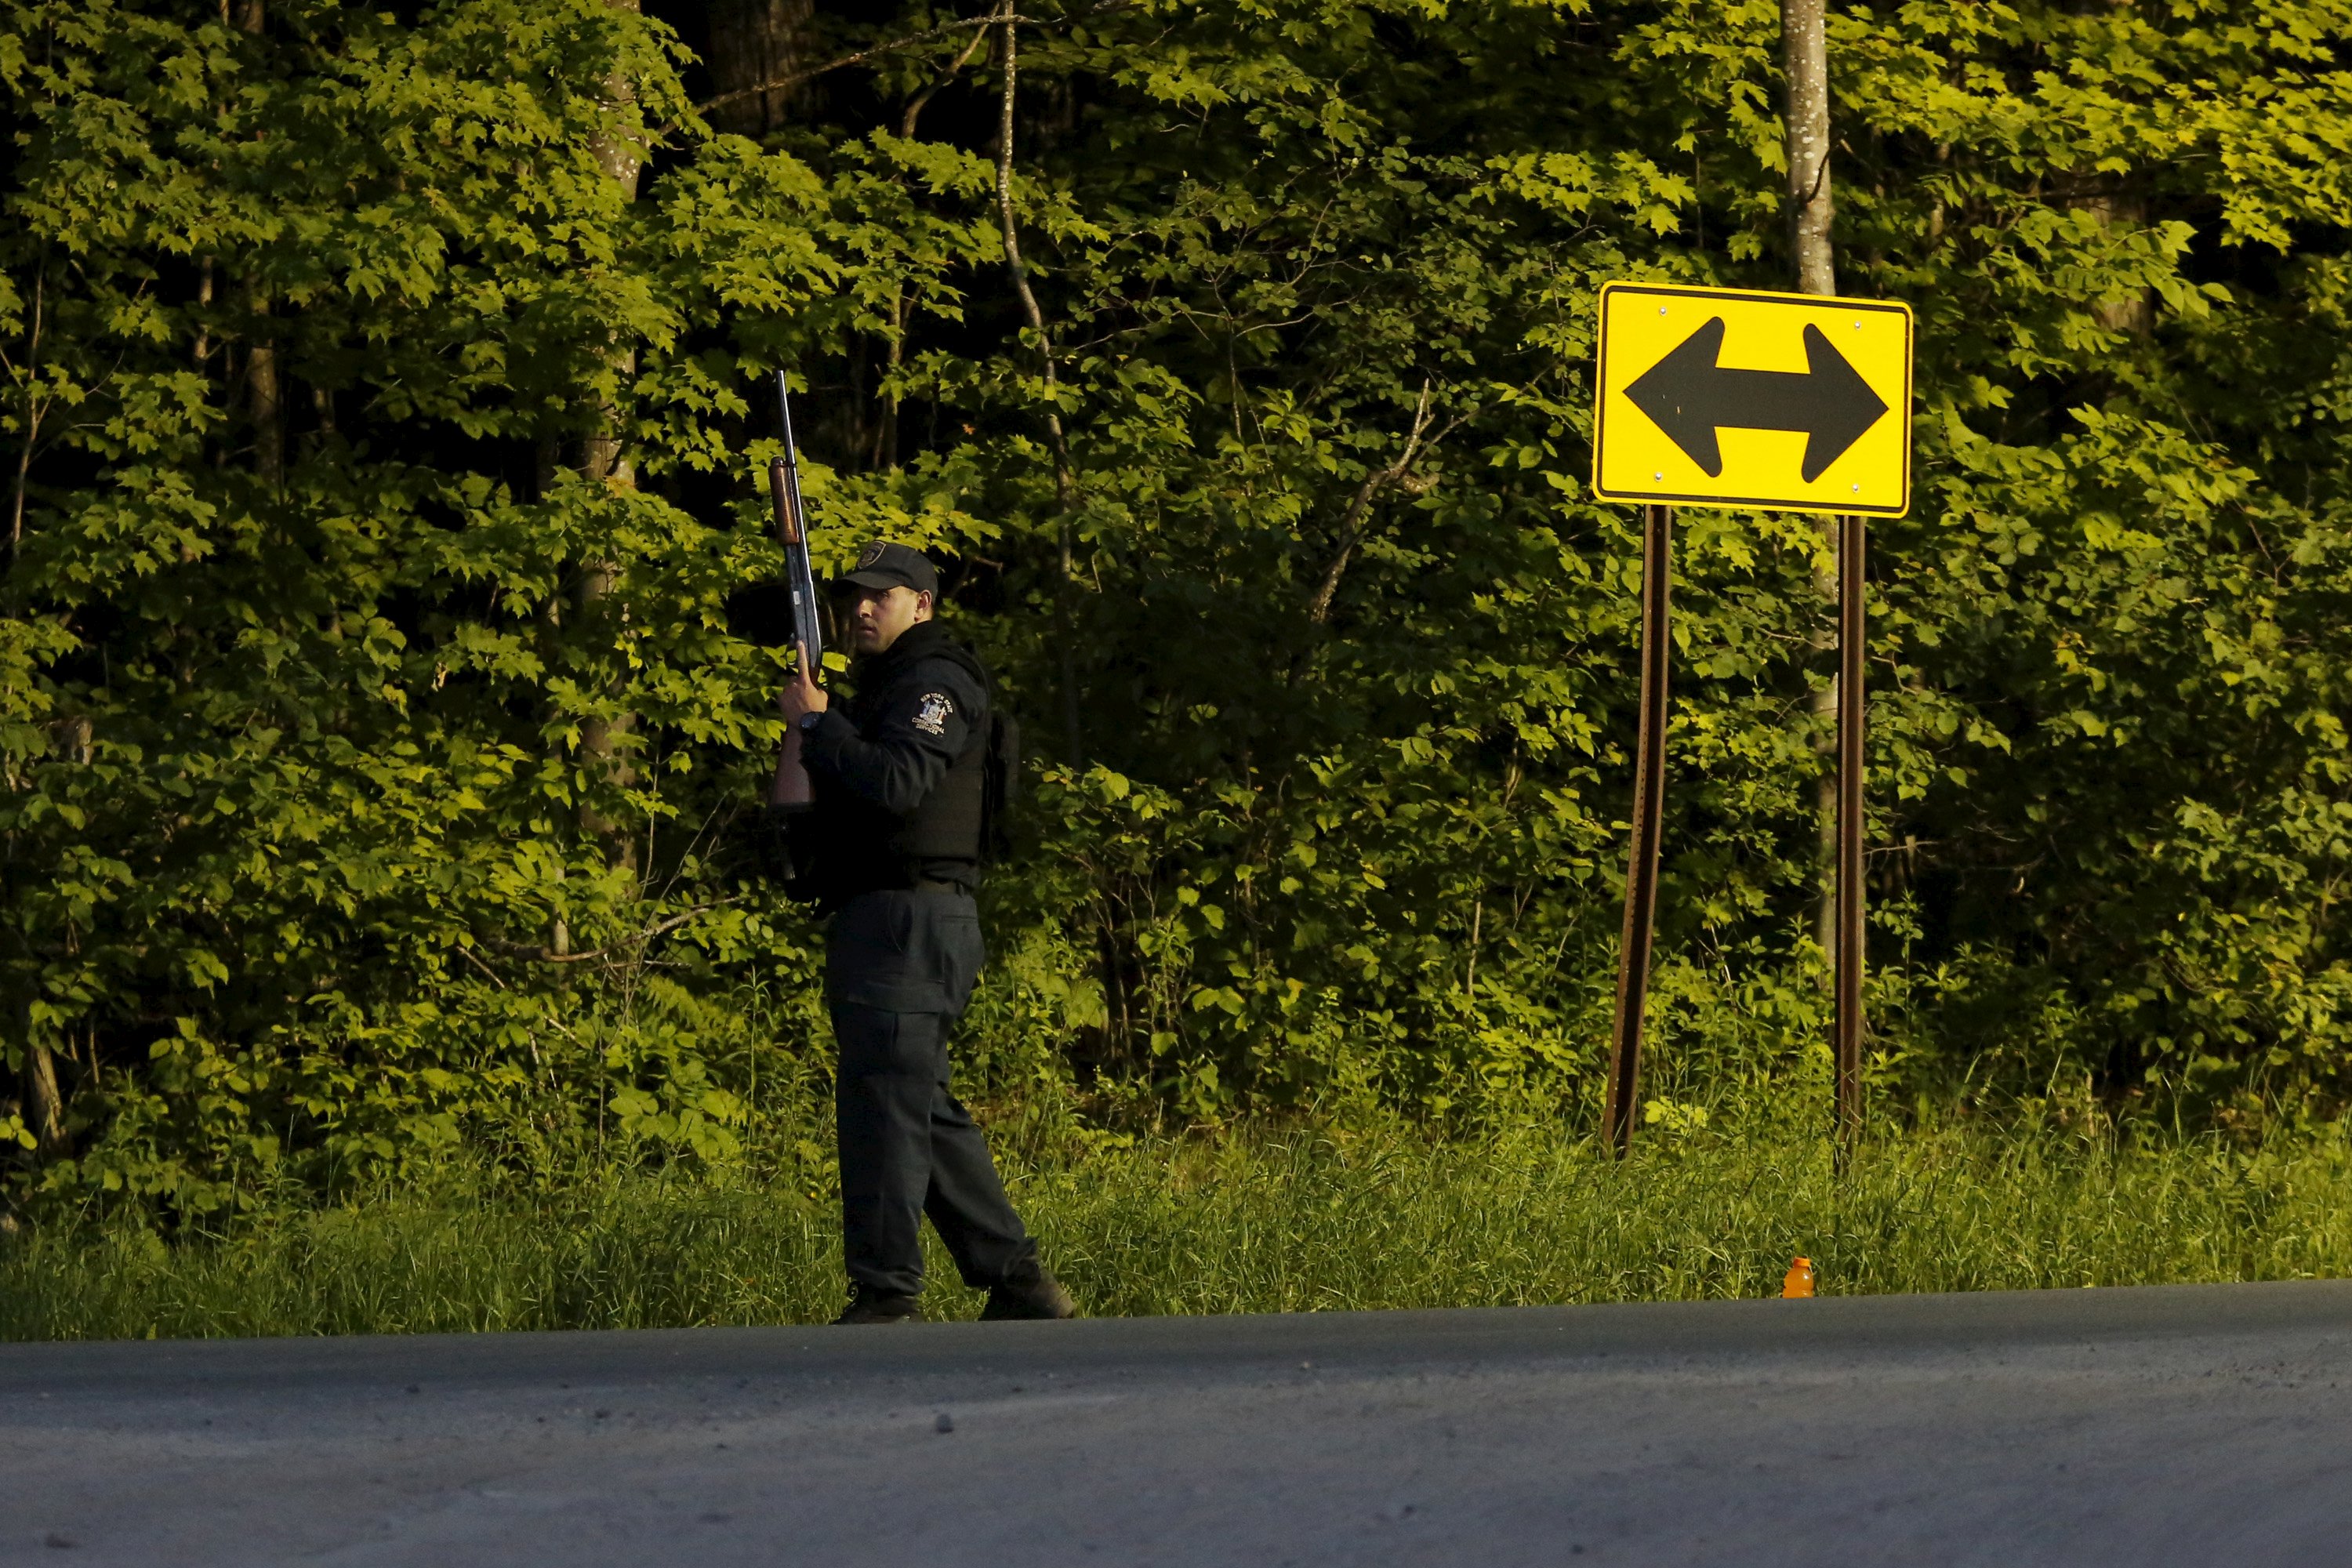 New York prison escapee killed by police, accomplice still at large